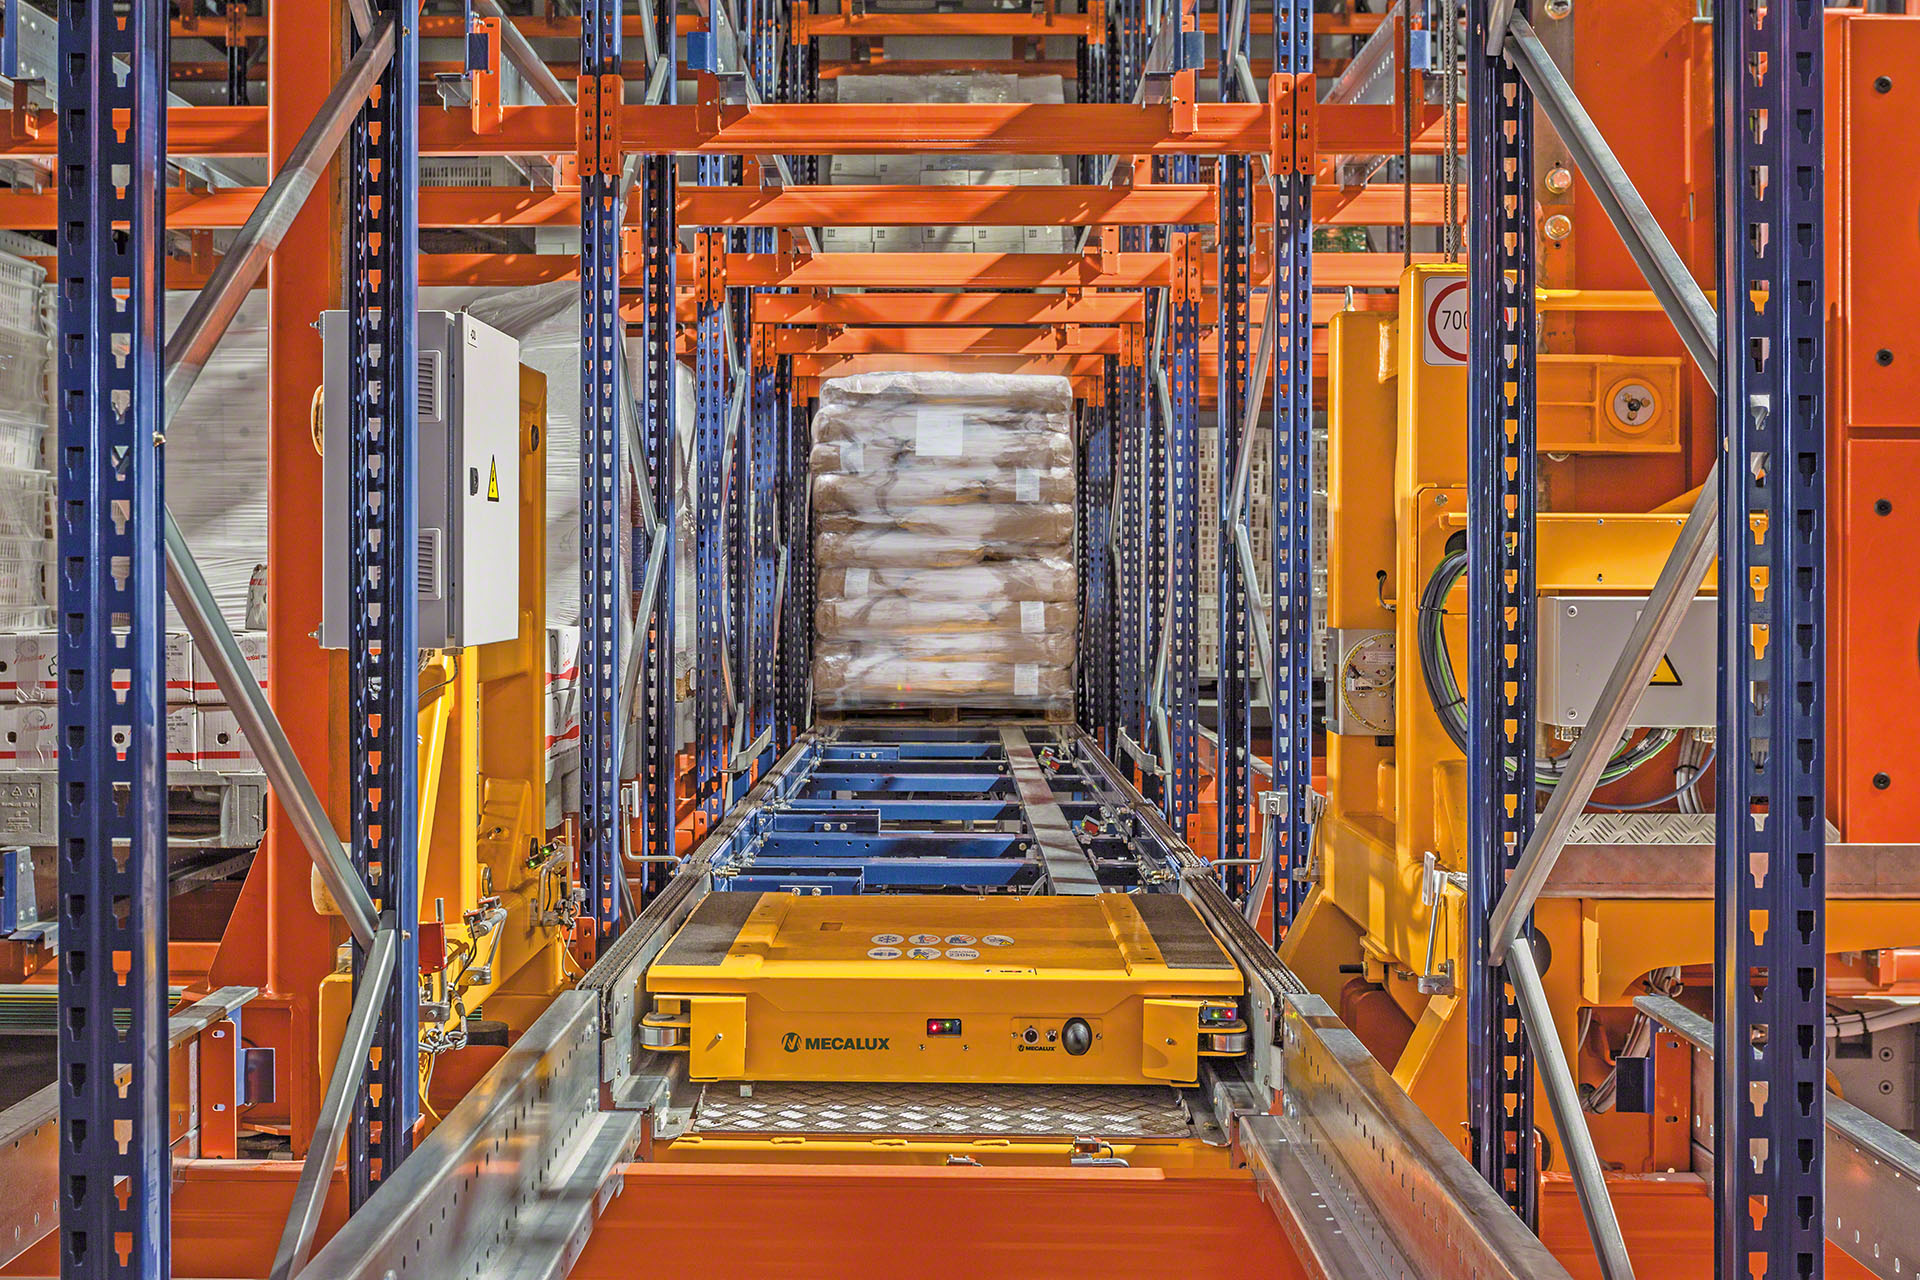 The shuttle is inserted into the storage channels to compact the pallets